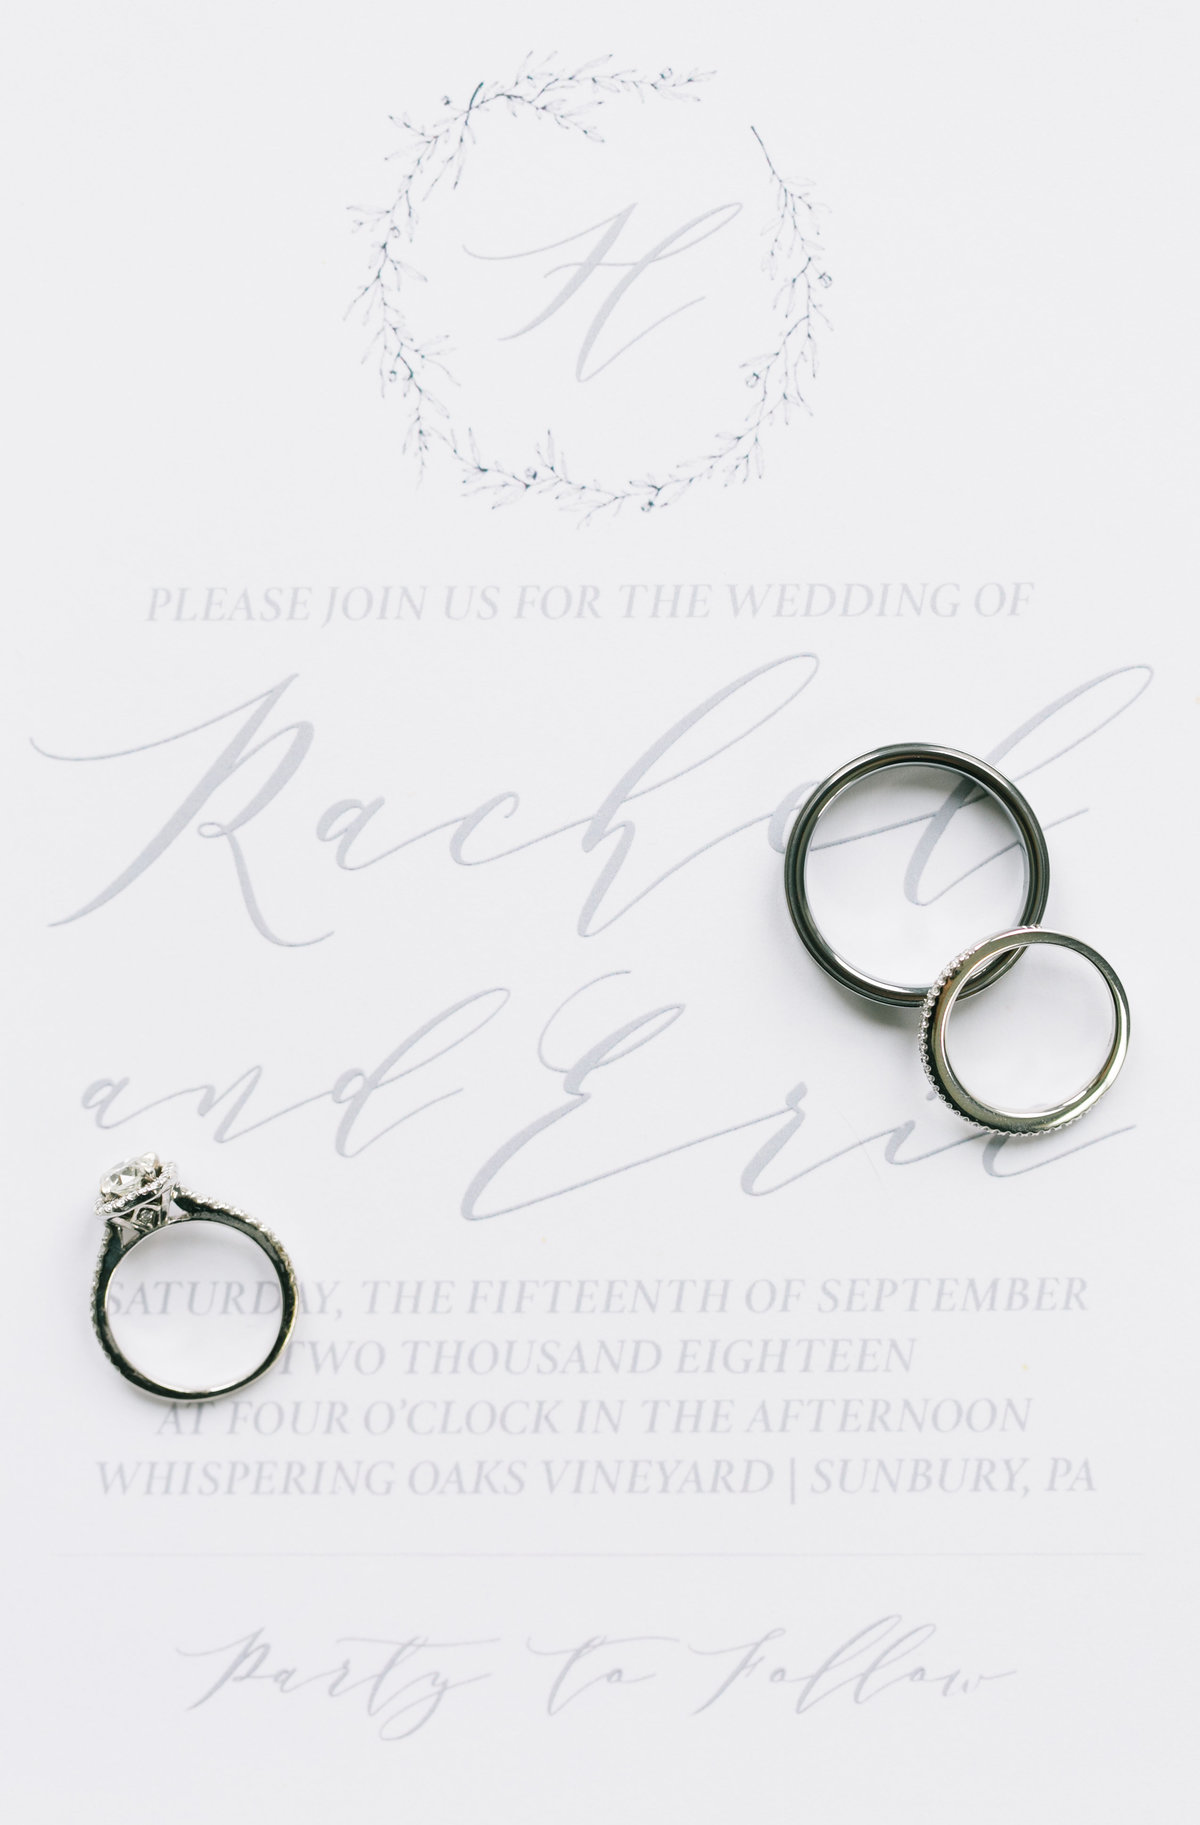 white wedding invitations with wedding rings